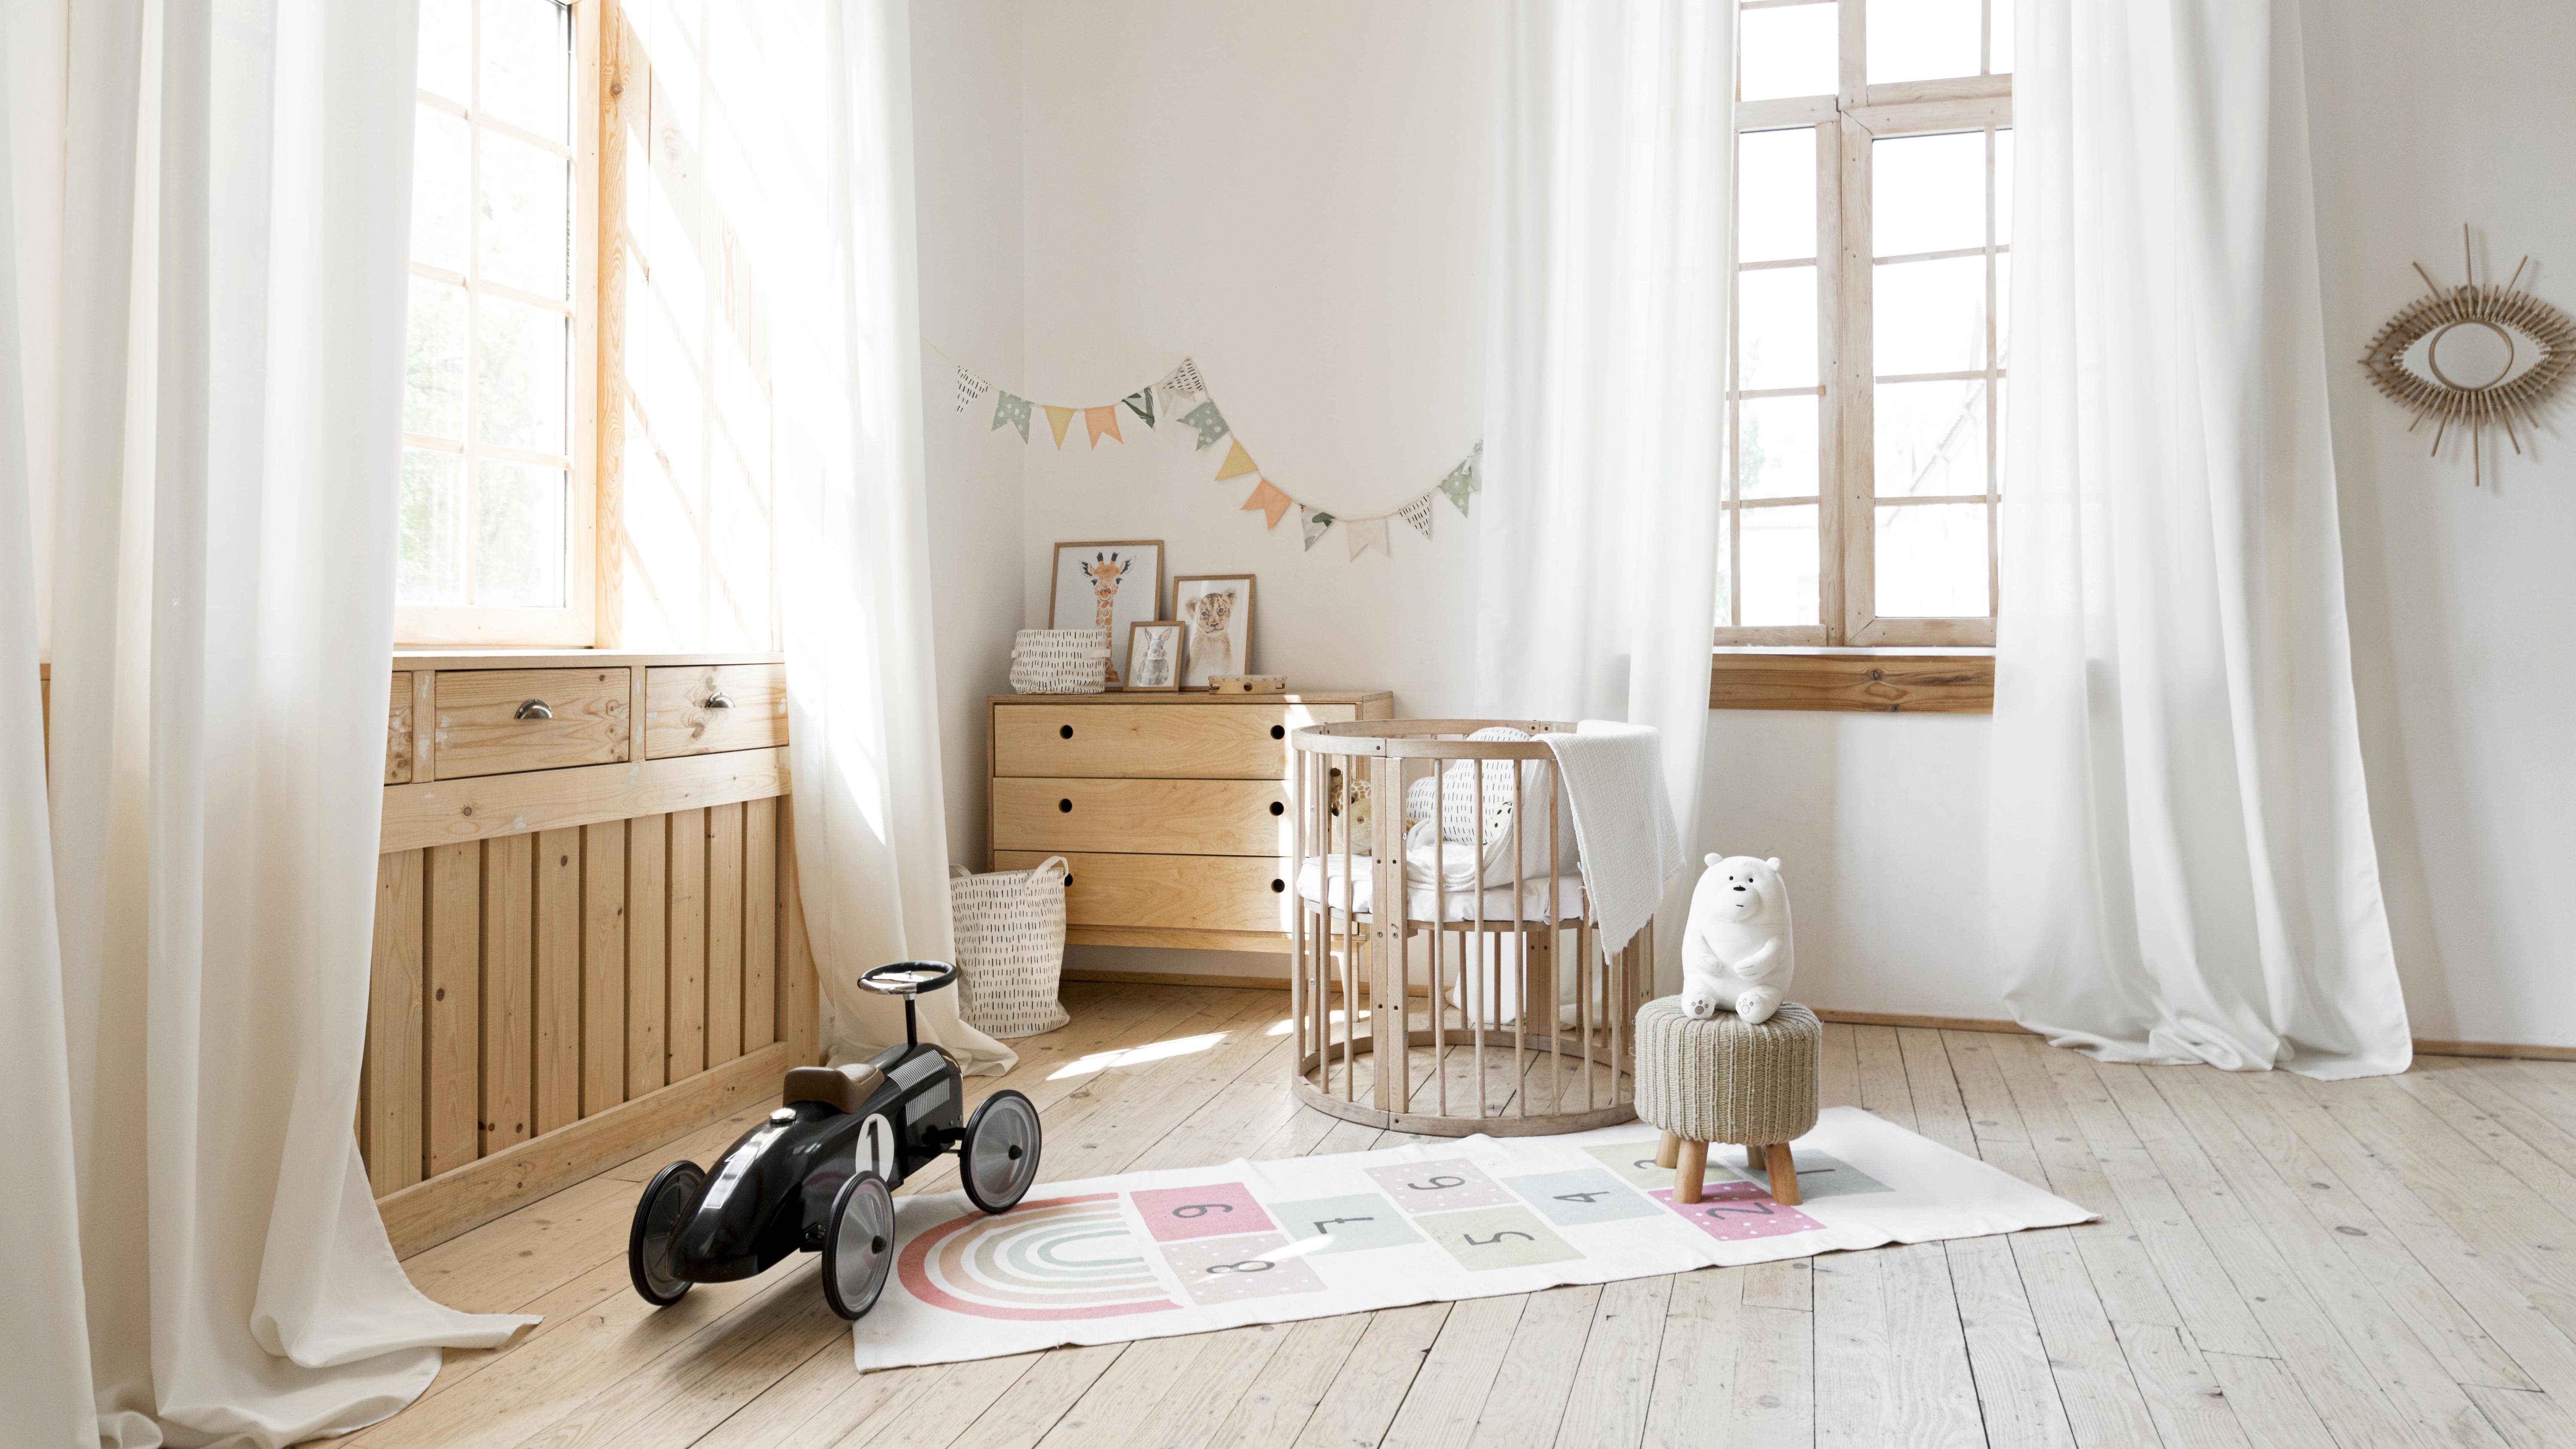 front-view-of-child-room-with-rustic-interior-design.jpg